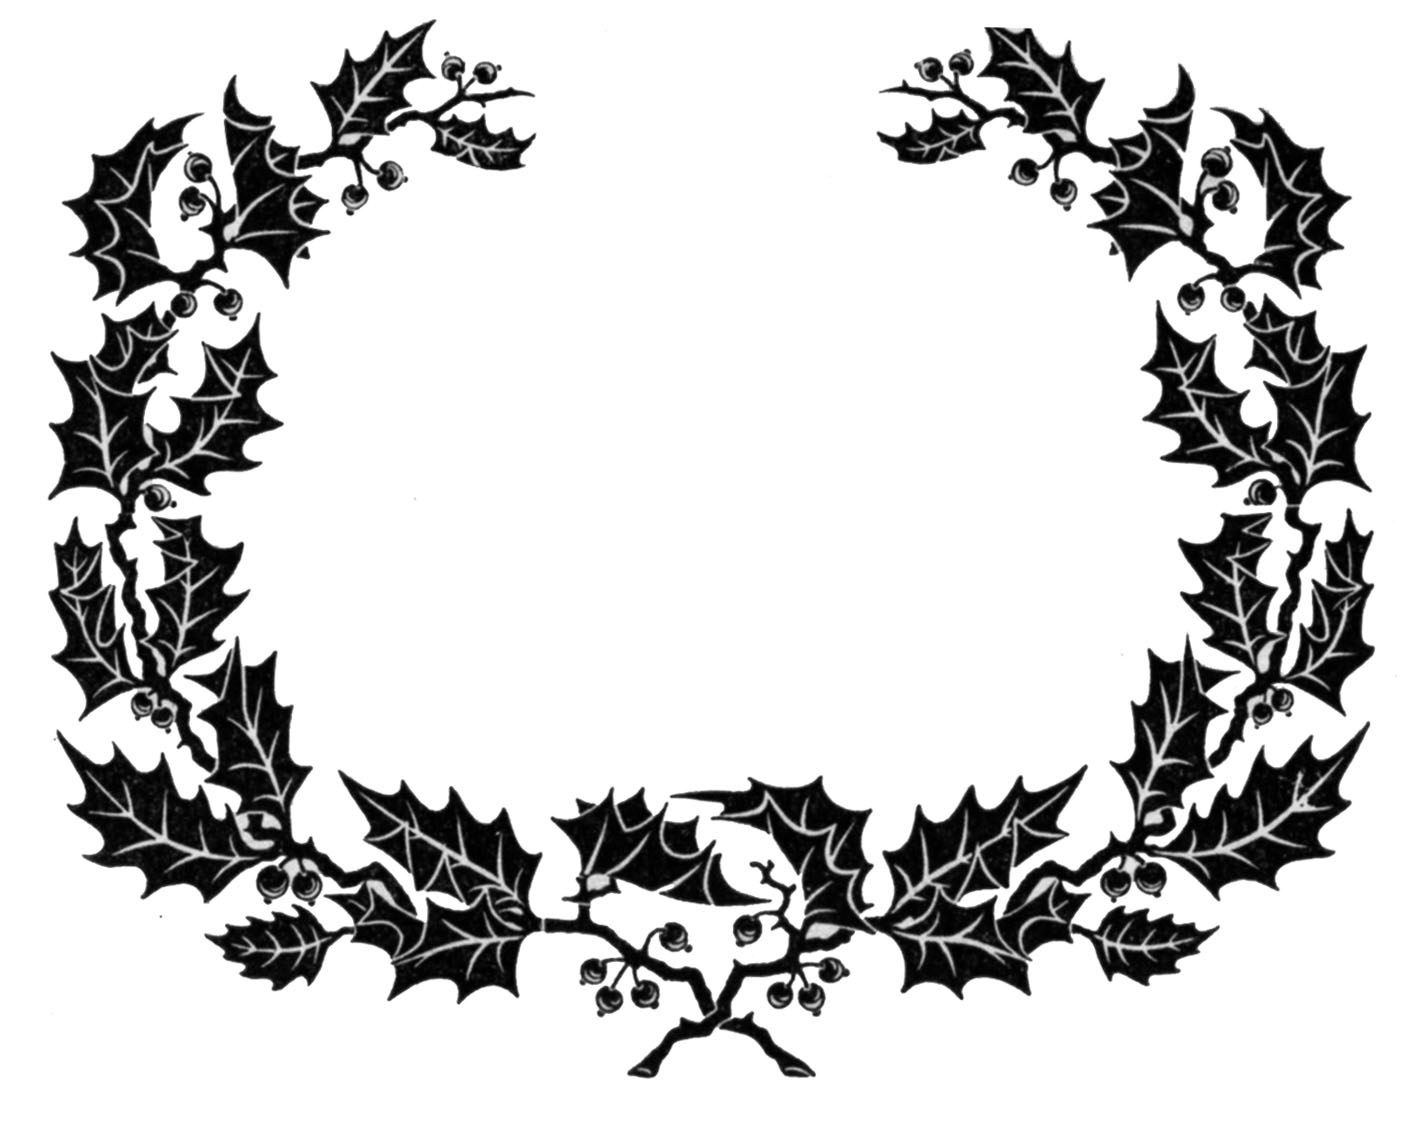 Vintage Clip Art - Holly Wreath Graphic Frame - The Graphics Fairy